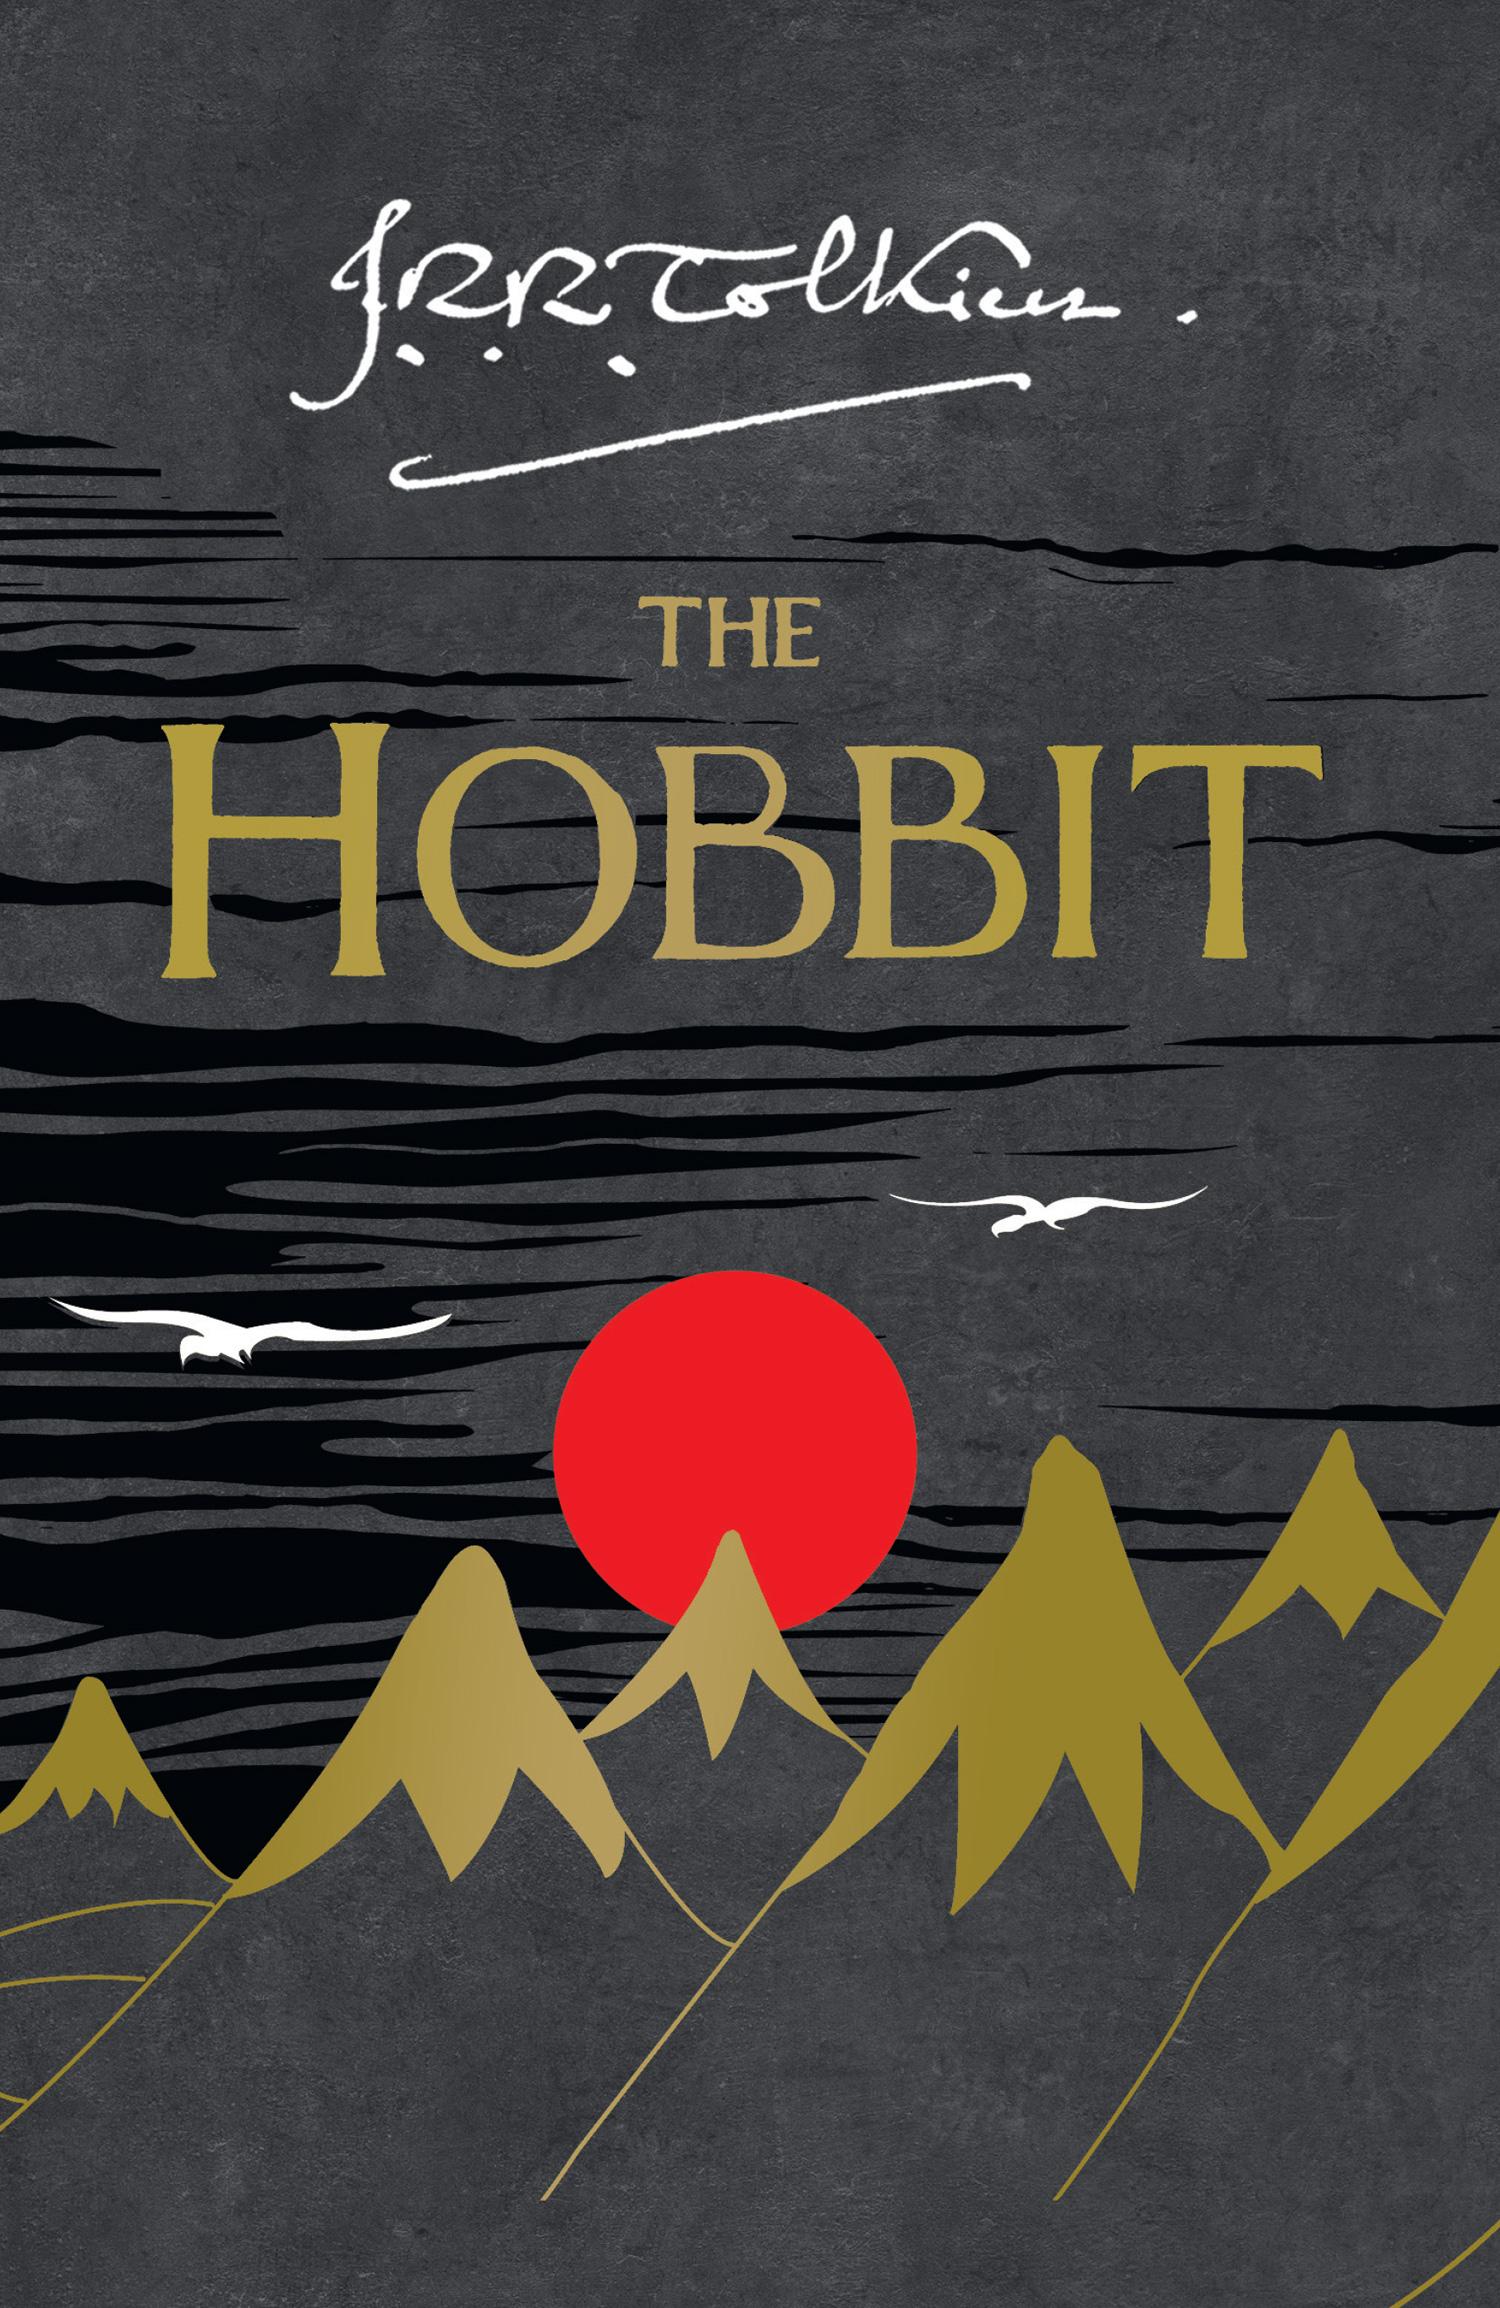 The Hobbit or There and Back Again. 75th Anniversary Edition / John Ronald Reuel Tolkien / Taschenbuch / 305 S. / Englisch / 1996 / Harper Collins Publ. UK / EAN 9780261103344 - Tolkien, John Ronald Reuel